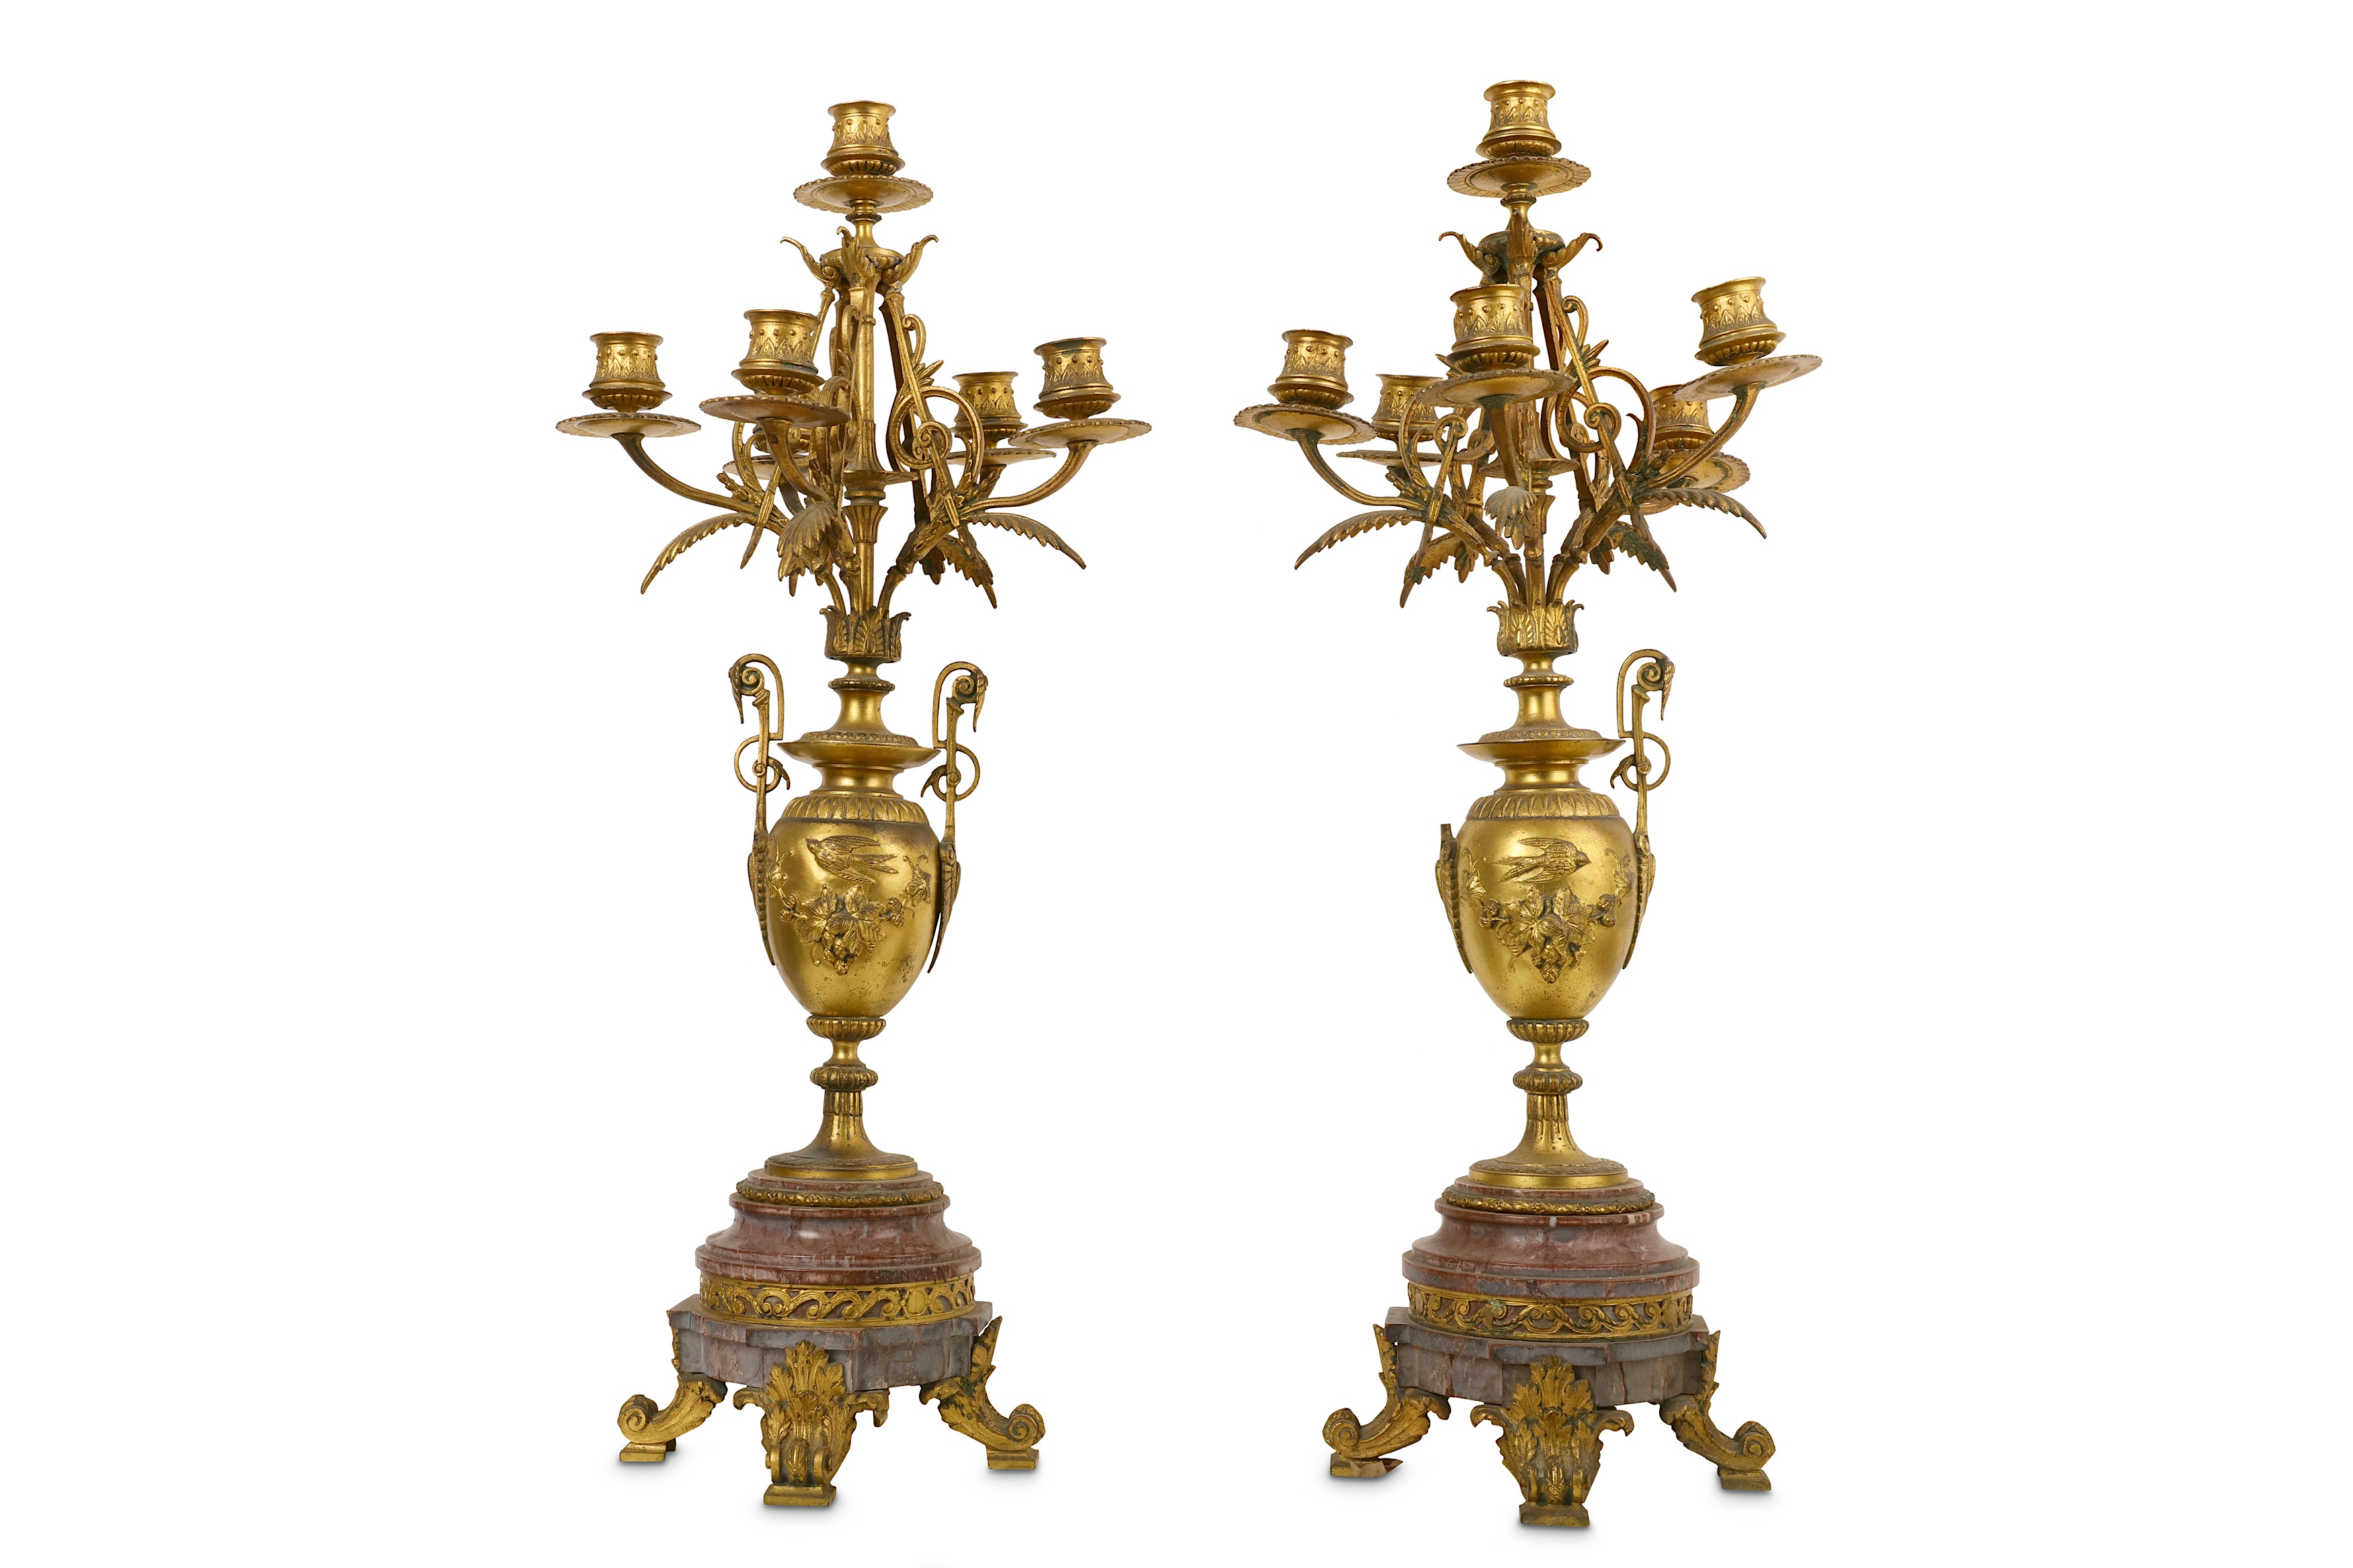 A PAIR OF LATE 19TH CENTURY FRENCH GILT METAL AND BRECCIA MARBLE CANDELABRA in the Neo-Grec style, - Image 4 of 7